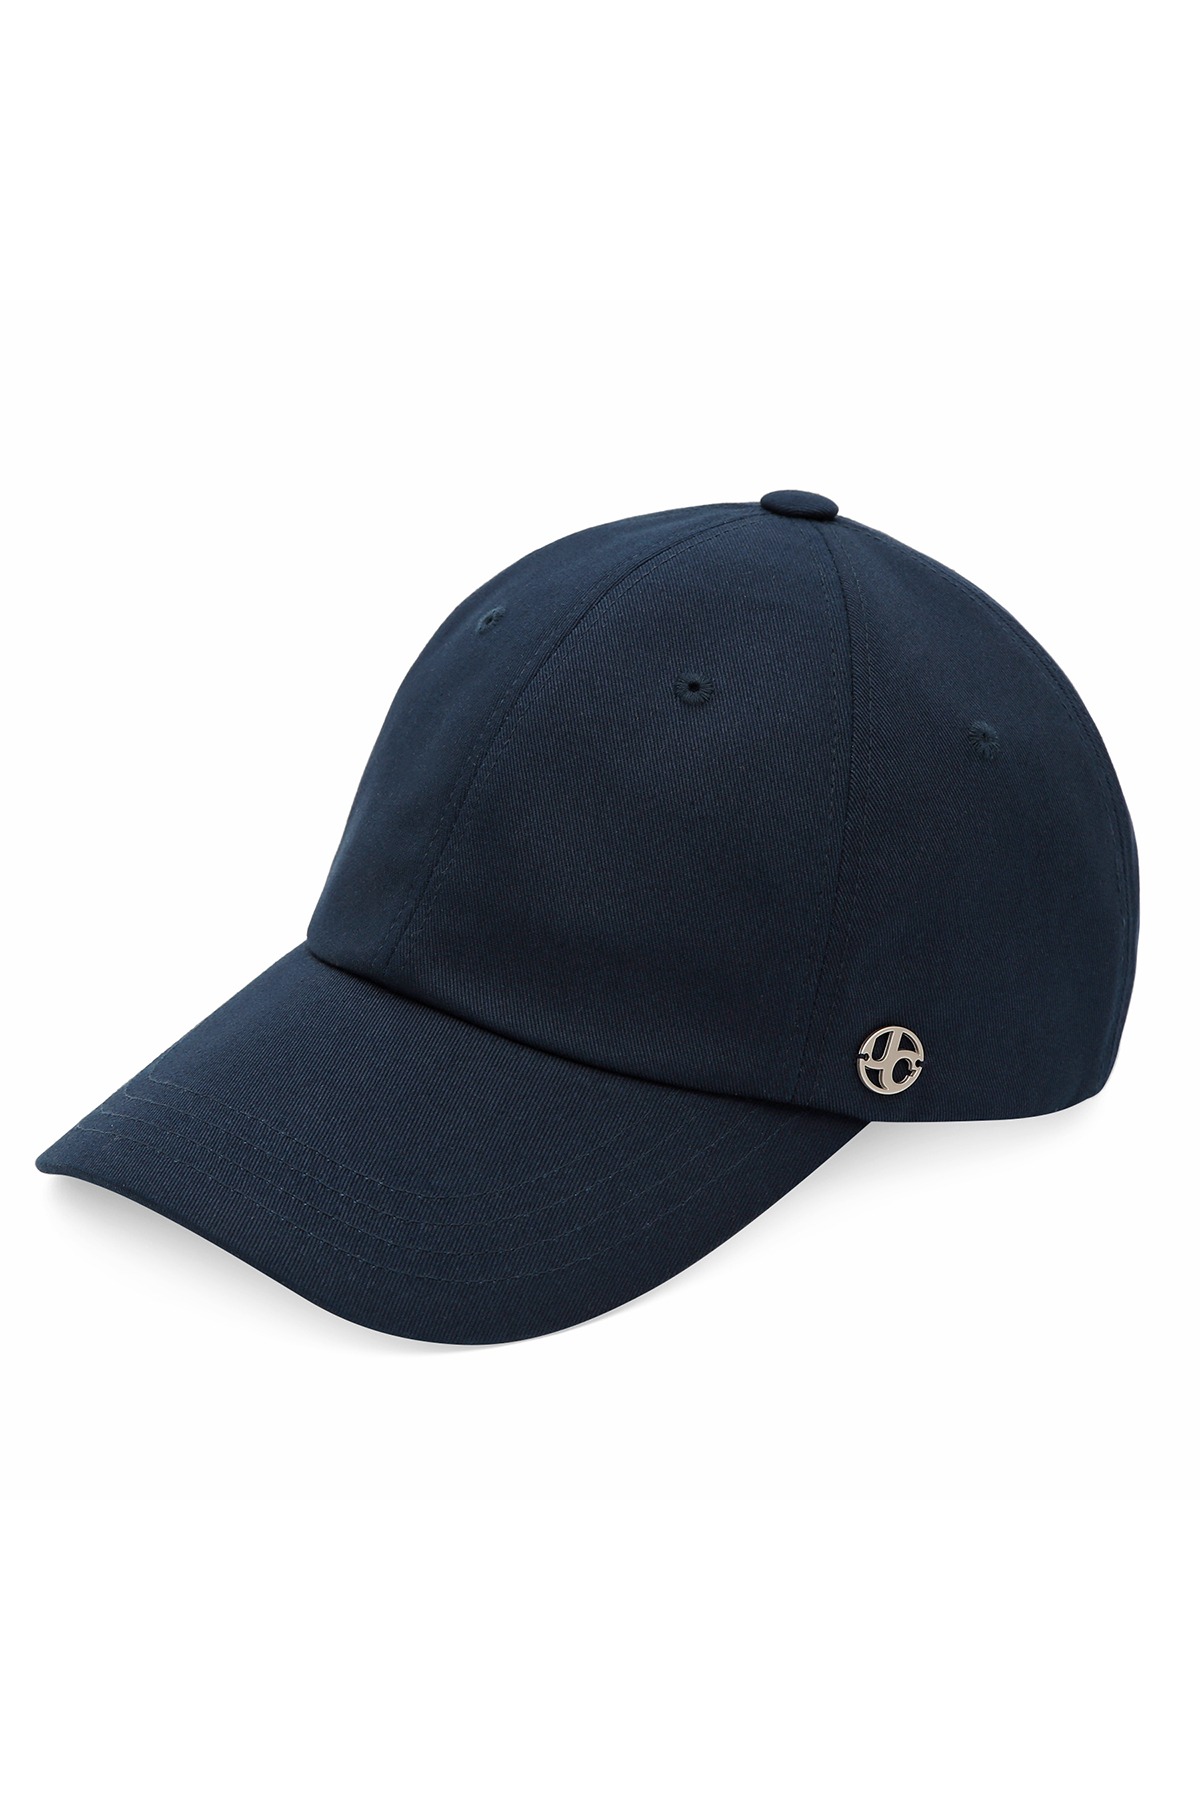 UC / OVER FIT BALL CAP / NV